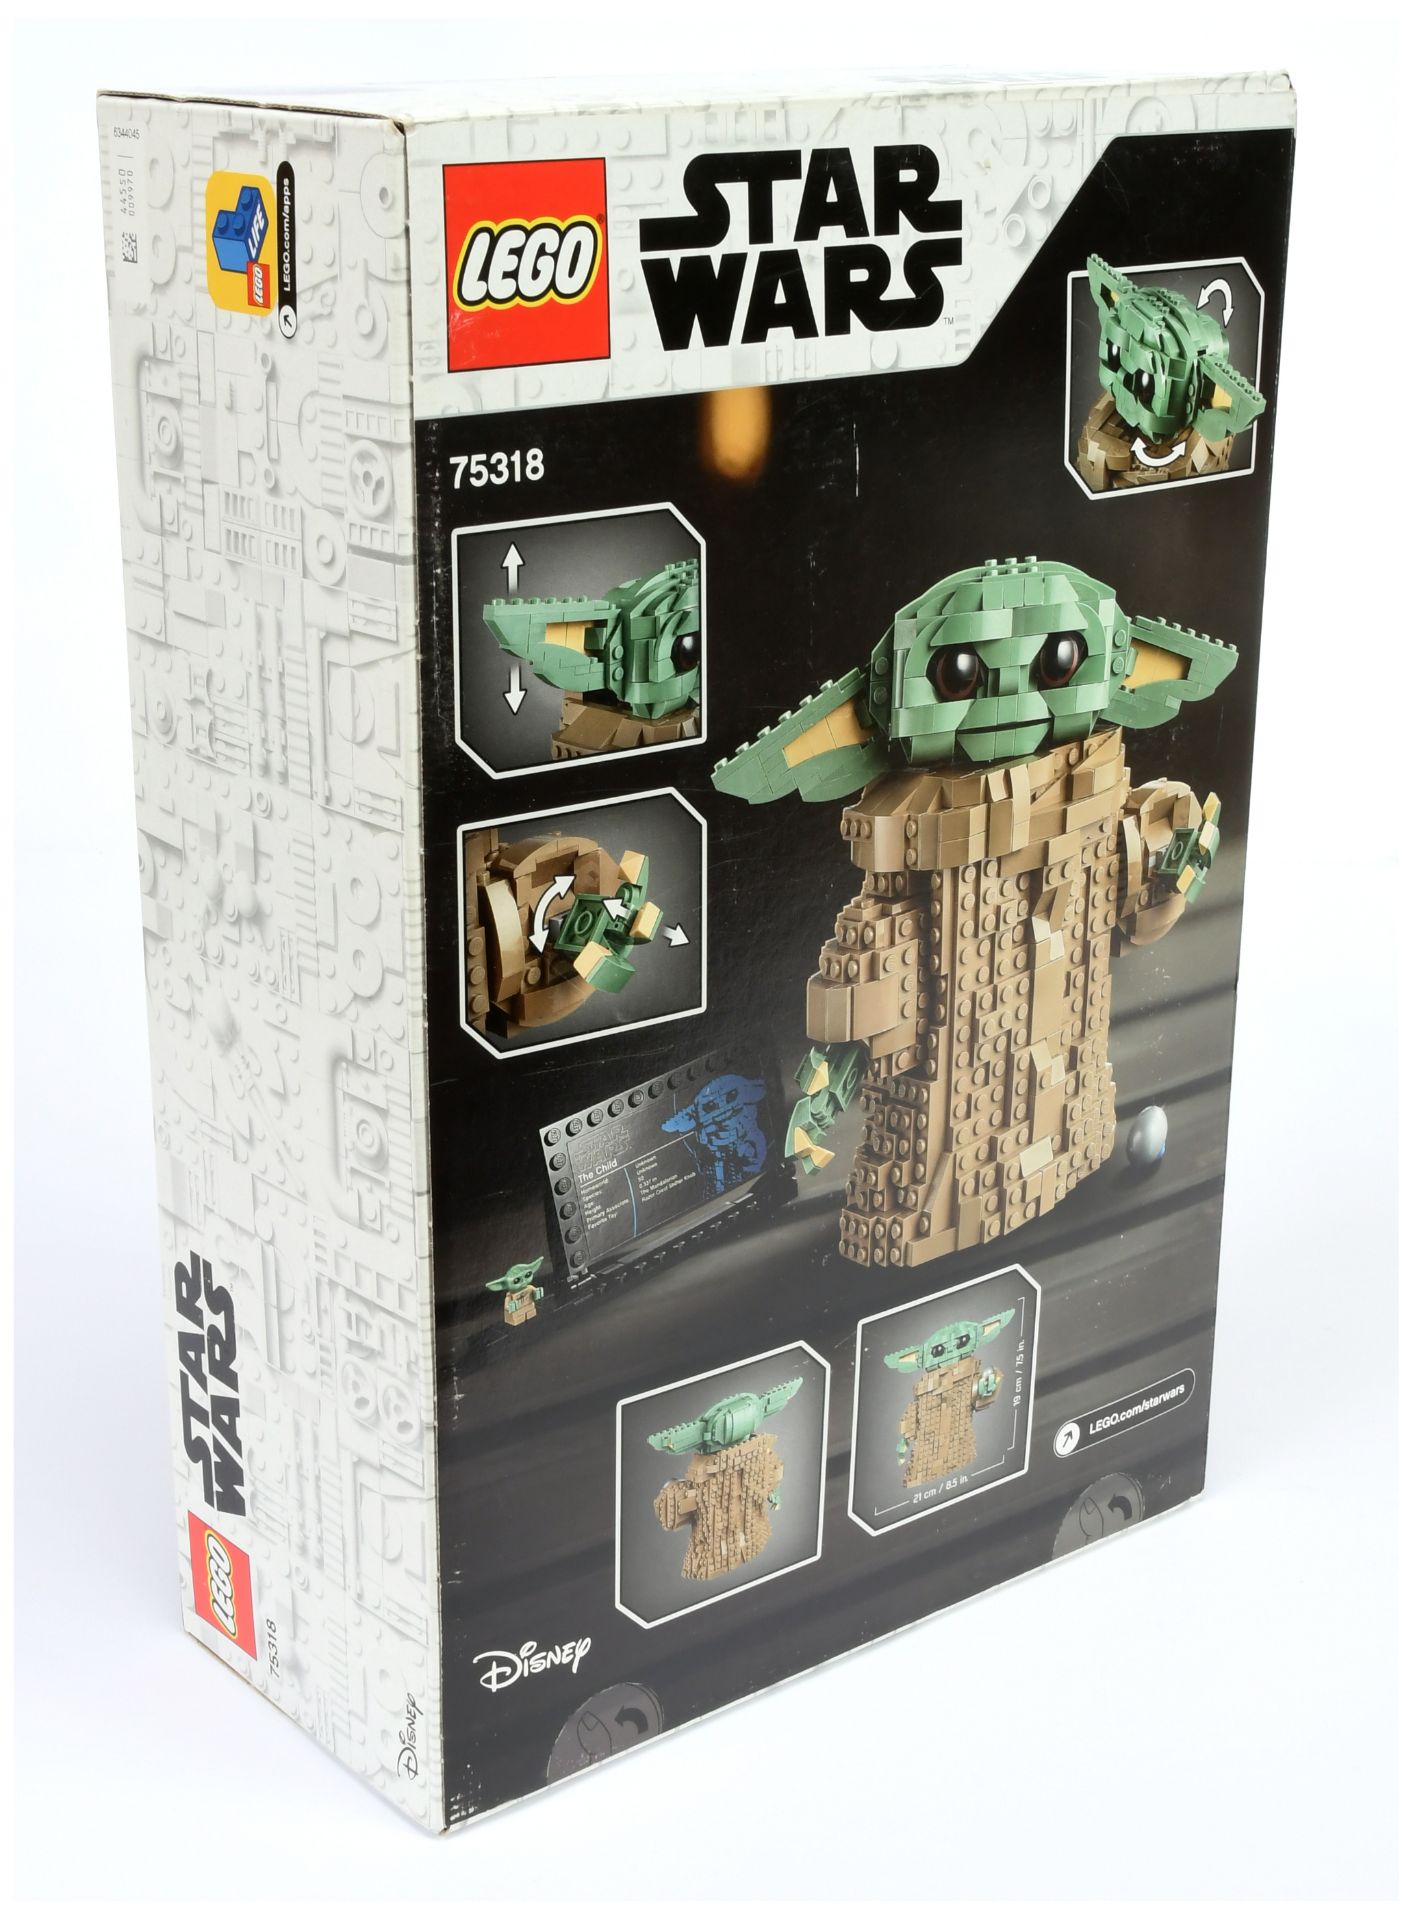 Lego Star Wars 75318 Mandalorian The Child, within Excellent Plus sealed packaging. - Image 2 of 2